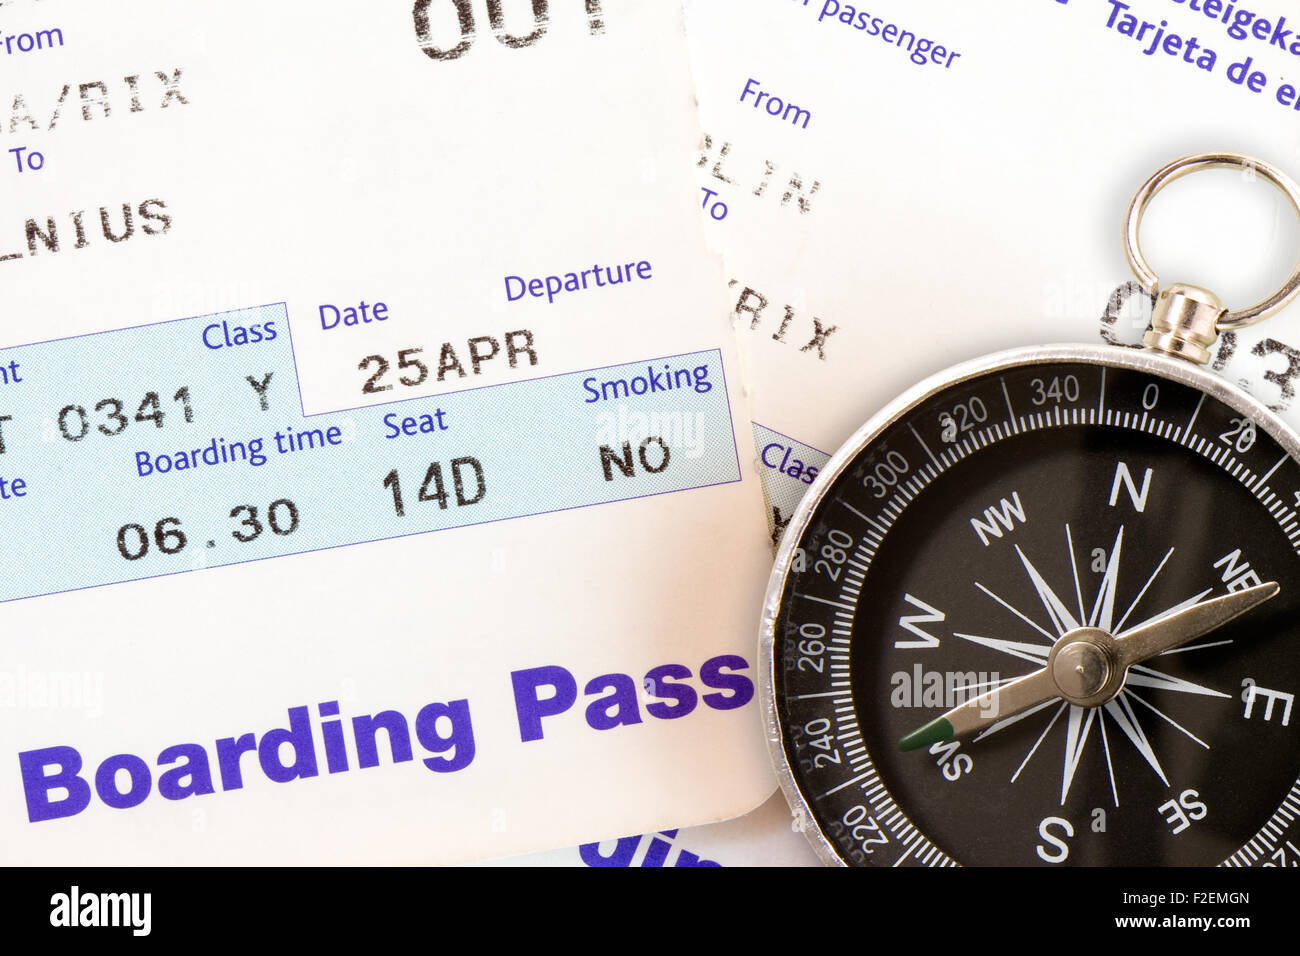 Air travel boarding pass and compass, close-up Stock Photo